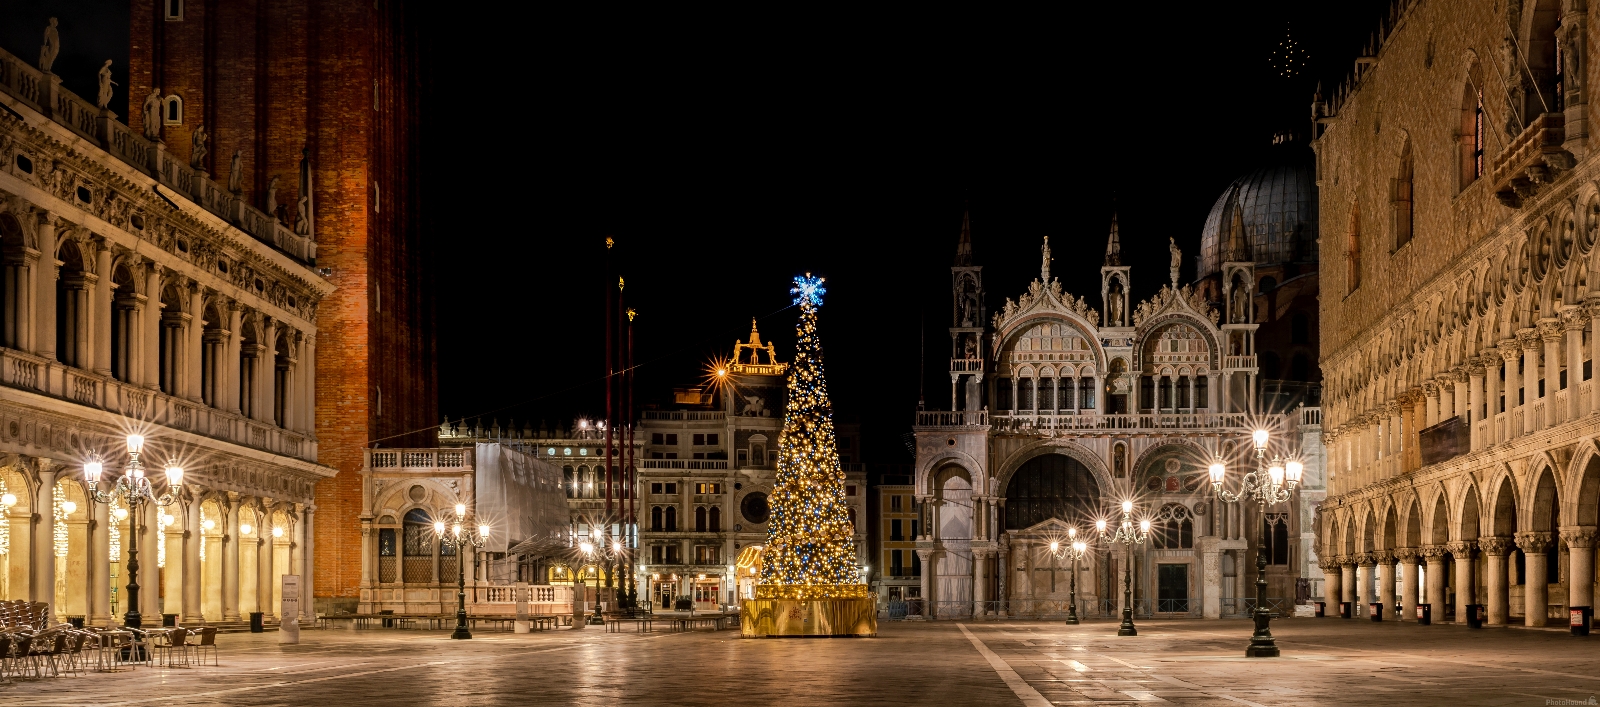 Image of Piazza San Marco (St Mark\'s Square) by William Warwick